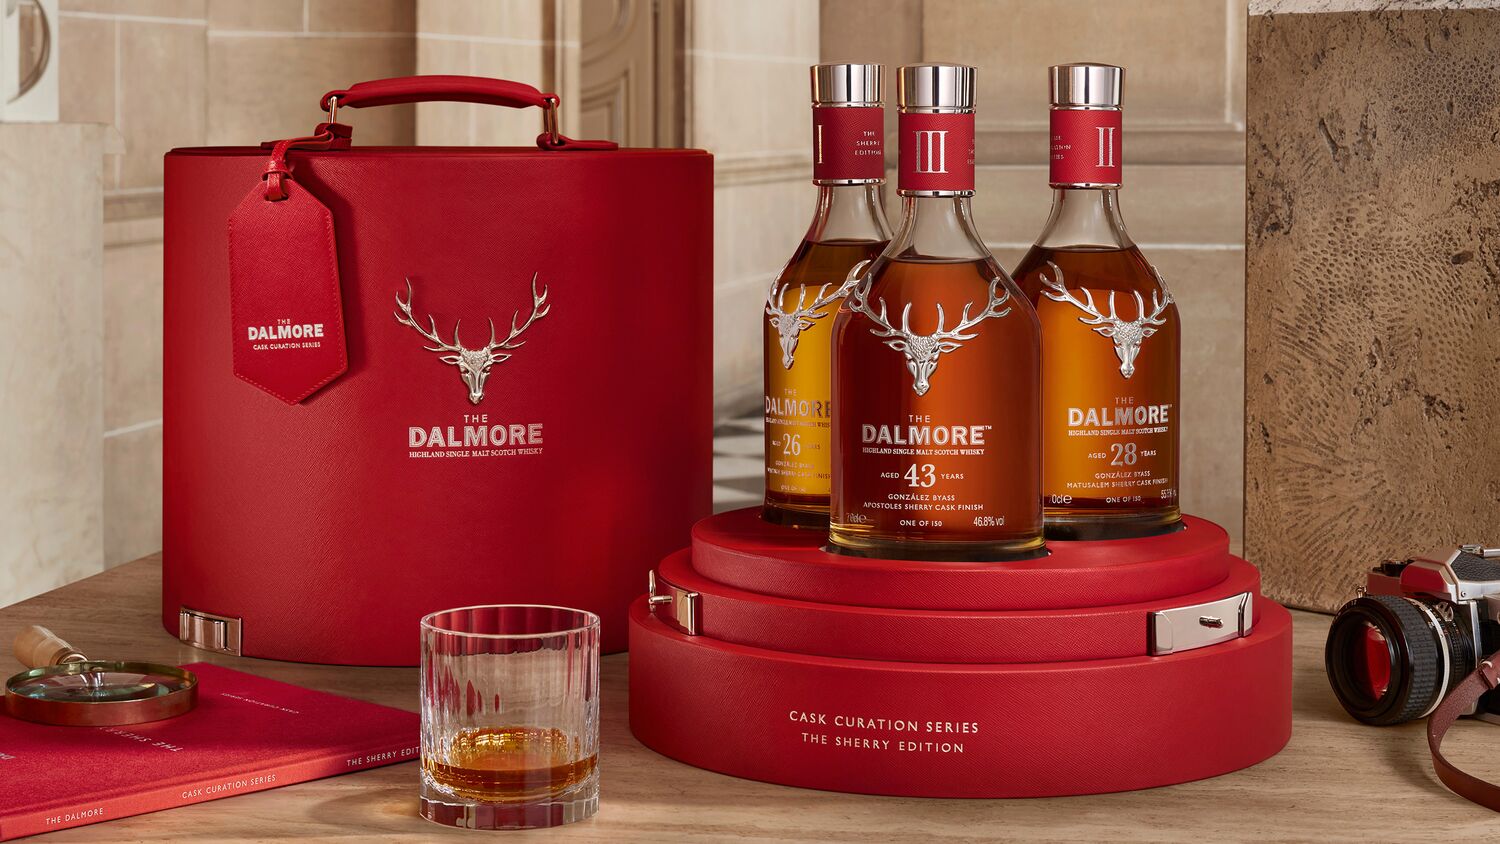 Introducing The Dalmore Cask Curation Series | The Dalmore